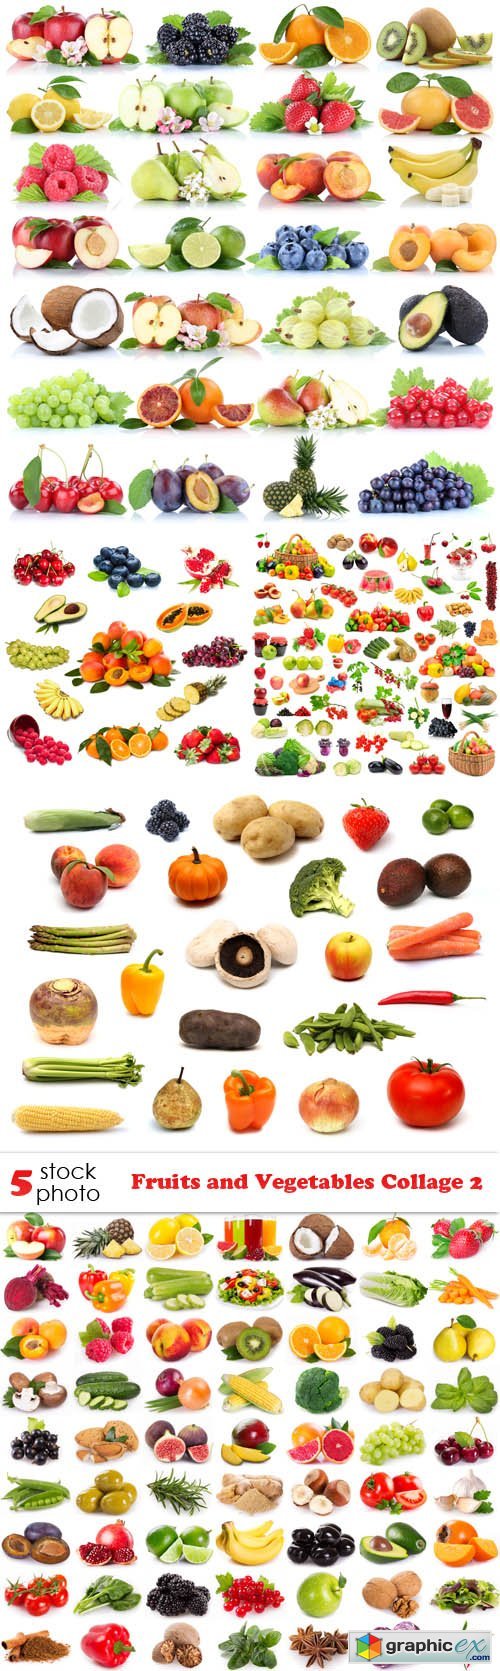 Fruits and Vegetables Collage 2